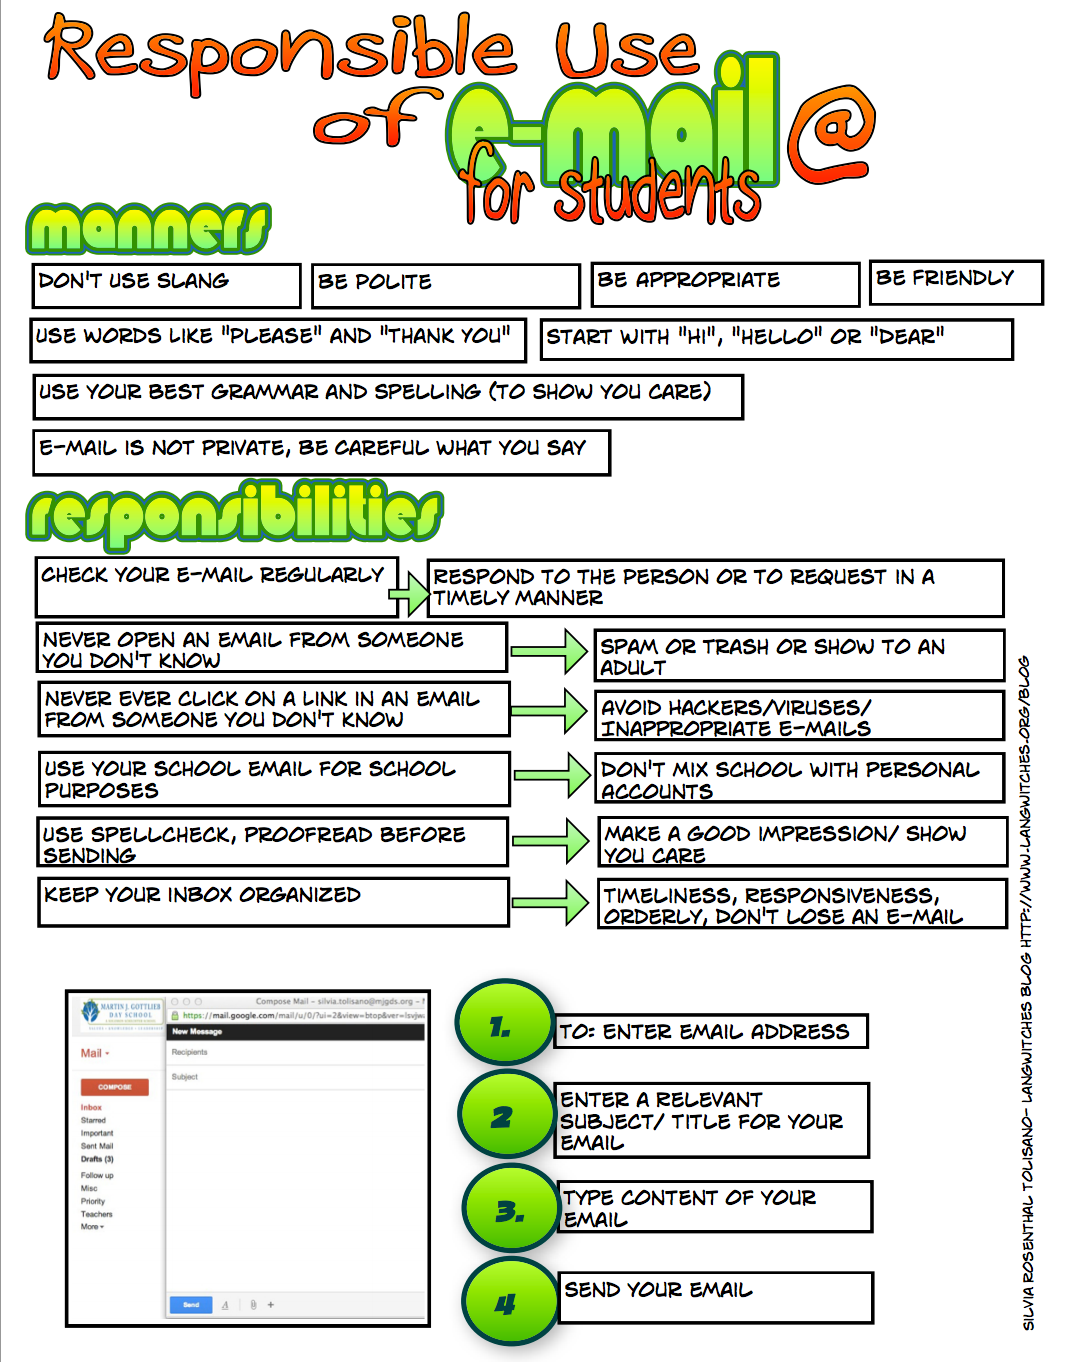 a-wonderful-visual-on-the-responsible-use-of-e-mail-for-students-educational-technology-and